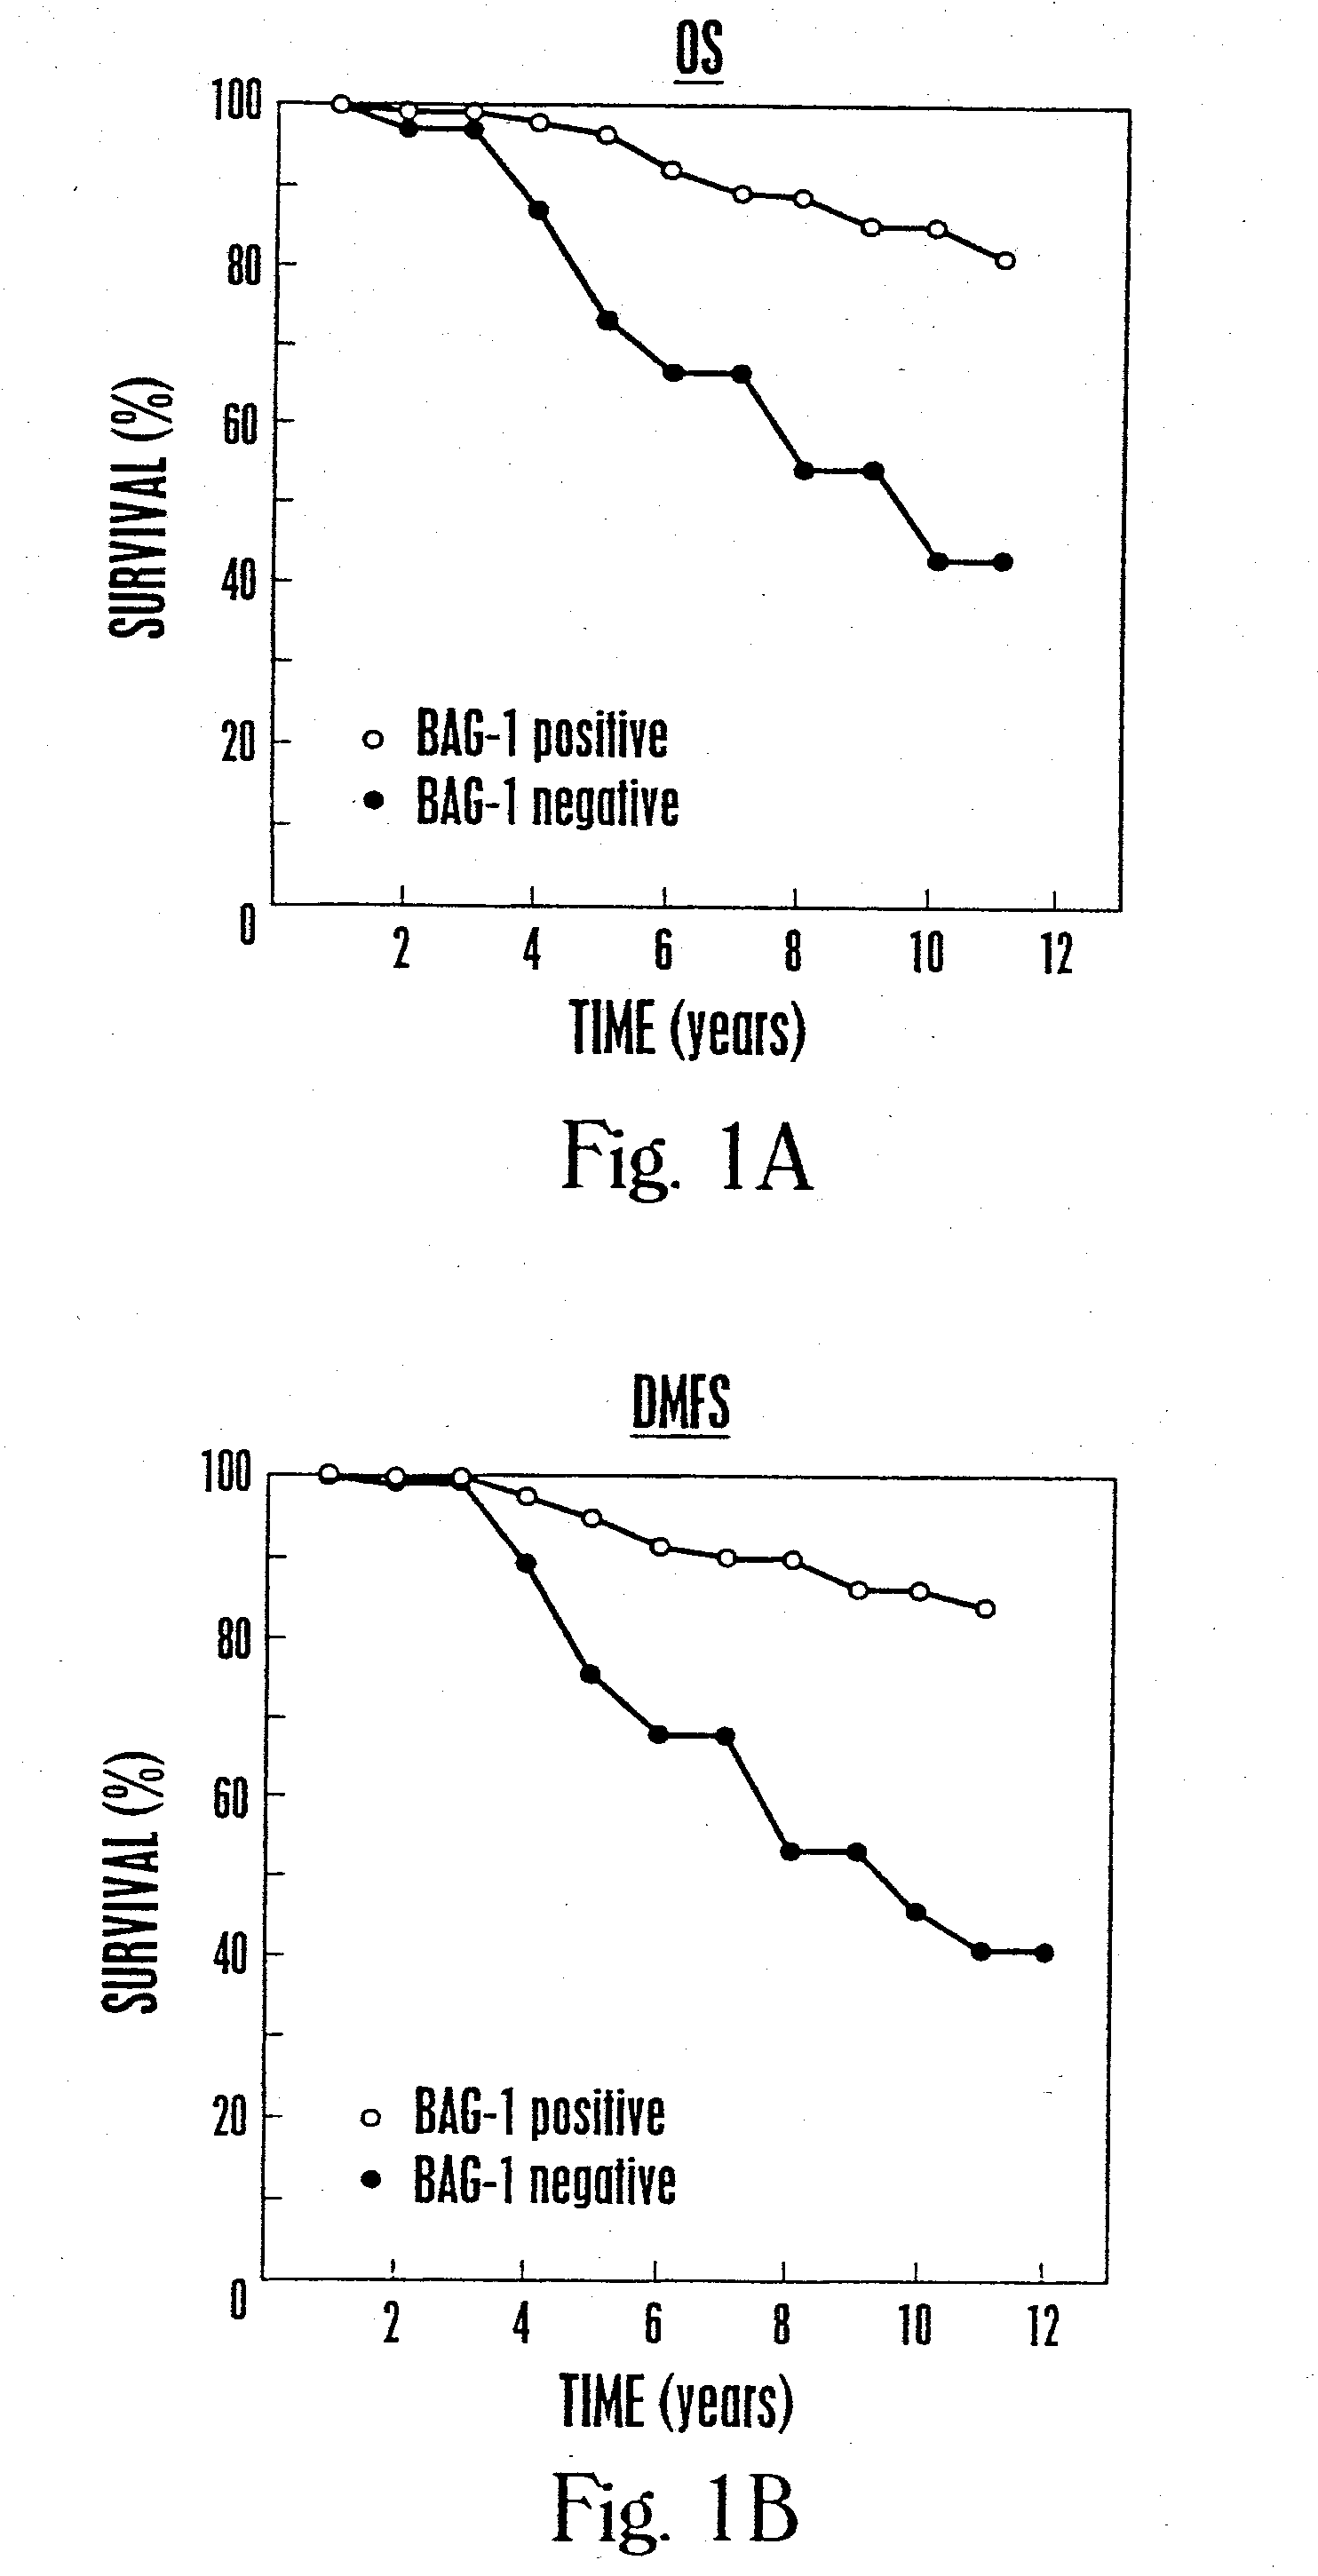 Method for determining the prognosis of cancer patients by measuring levels of bag expression